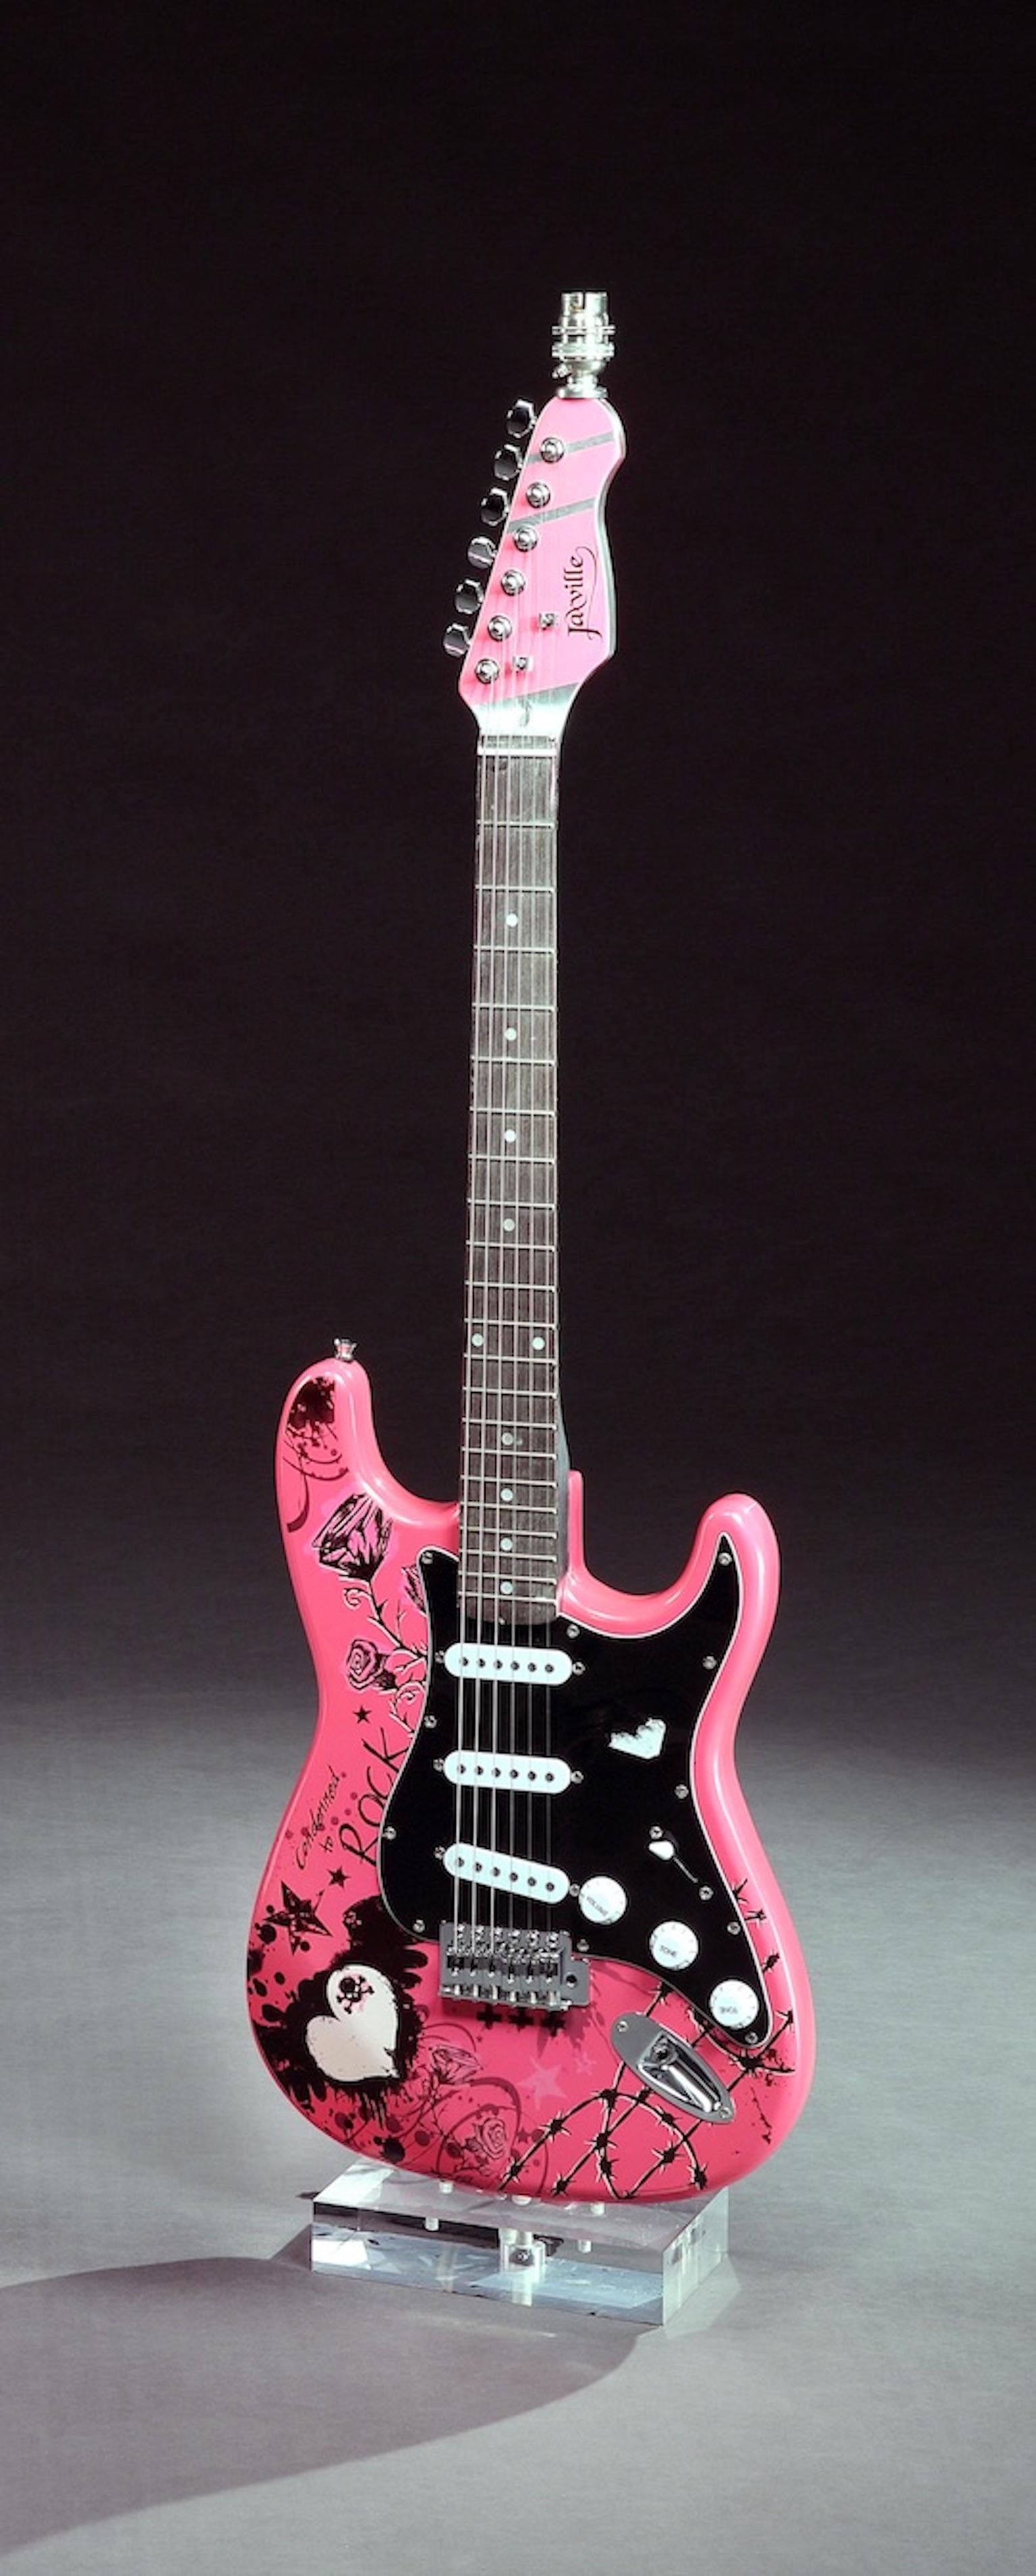 Vintage, rock and roll/punk enthusiasts lamp/guitar that can easily be strummed or played. Upcycled from a vintage pink punk kick-ass guitar for the discerning rock chick. Oozing attitude and style, this guitar exudes personality from every finely